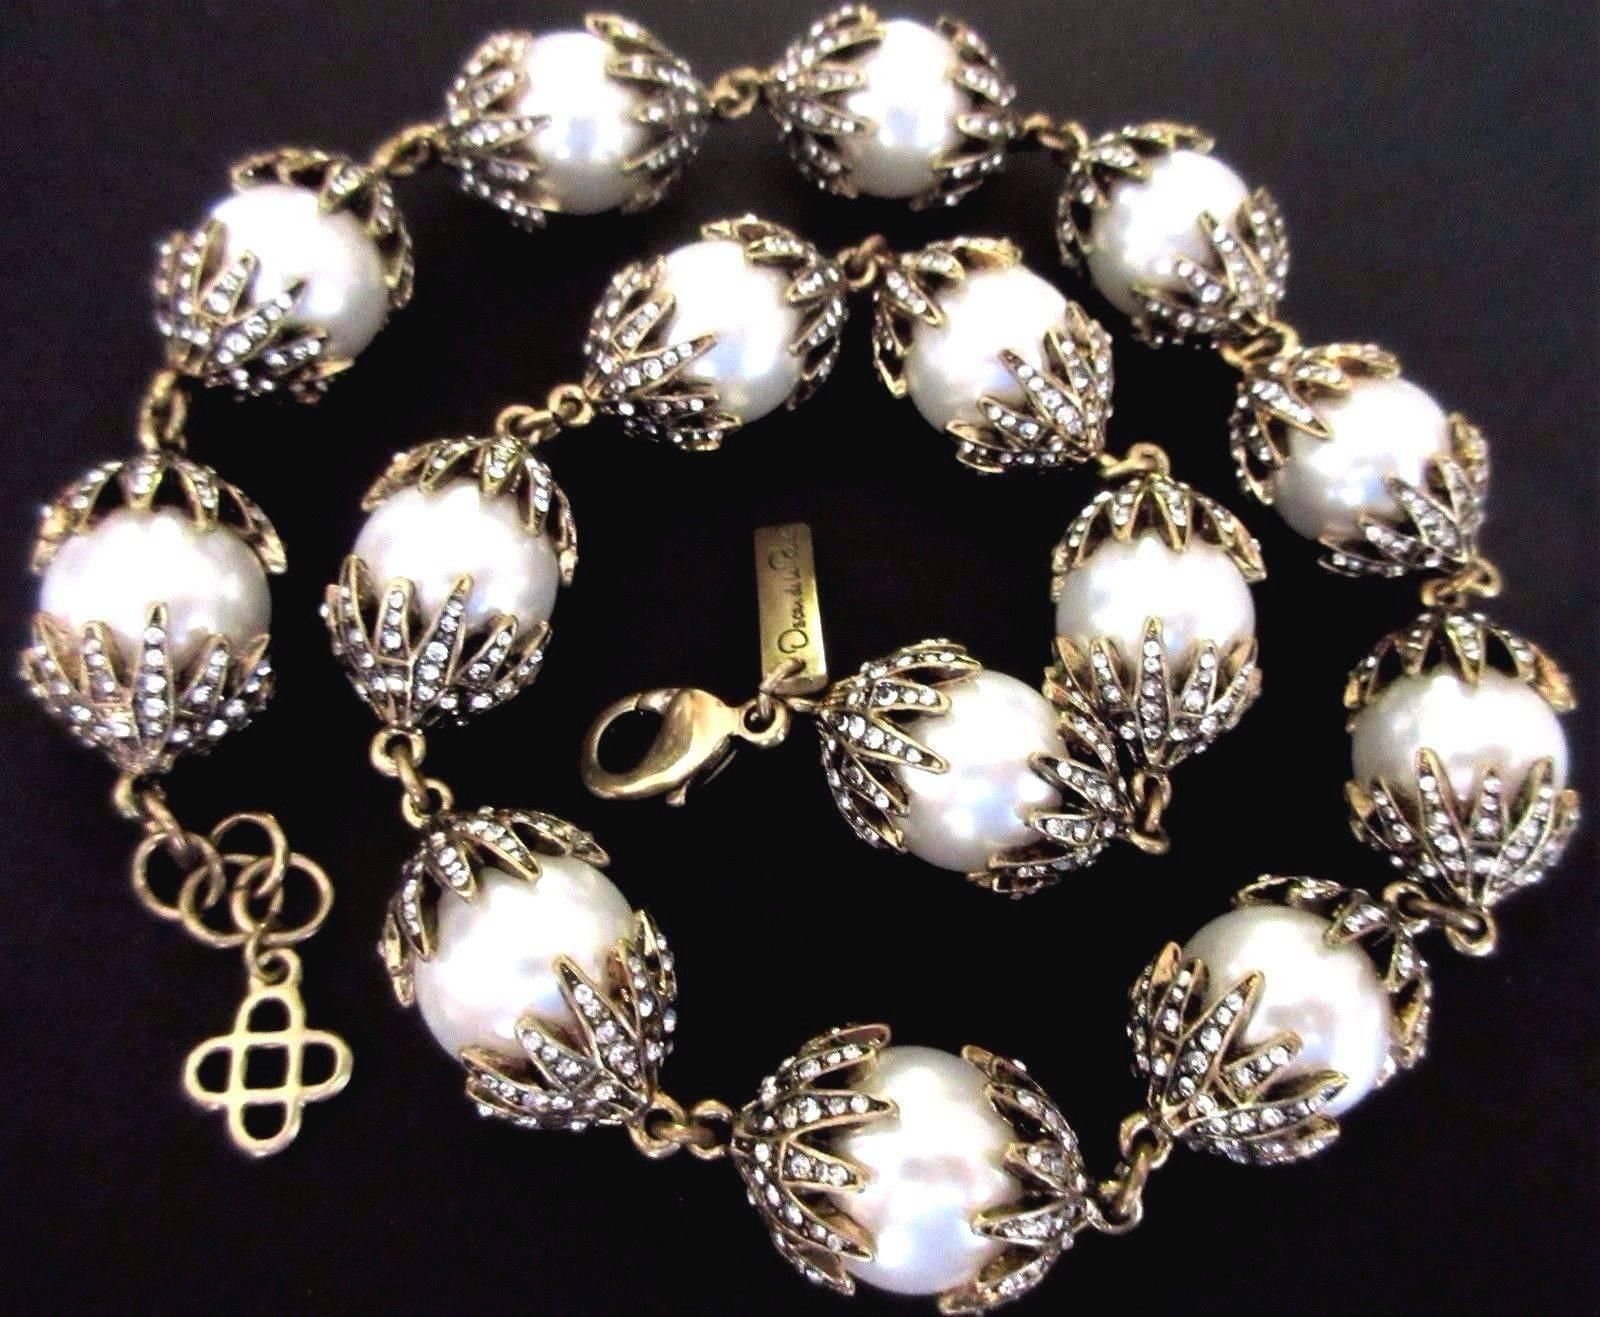 Beautiful Oscar De La Renta signed Runway Necklace, comprising Faux Pearl Crown capped Sparkling Crystals. Signed with script Signature hang tag and Iconic Fleur de Lis Charm; Approx. 22 inches long. Add your own Chic Style and Pizzazz to any